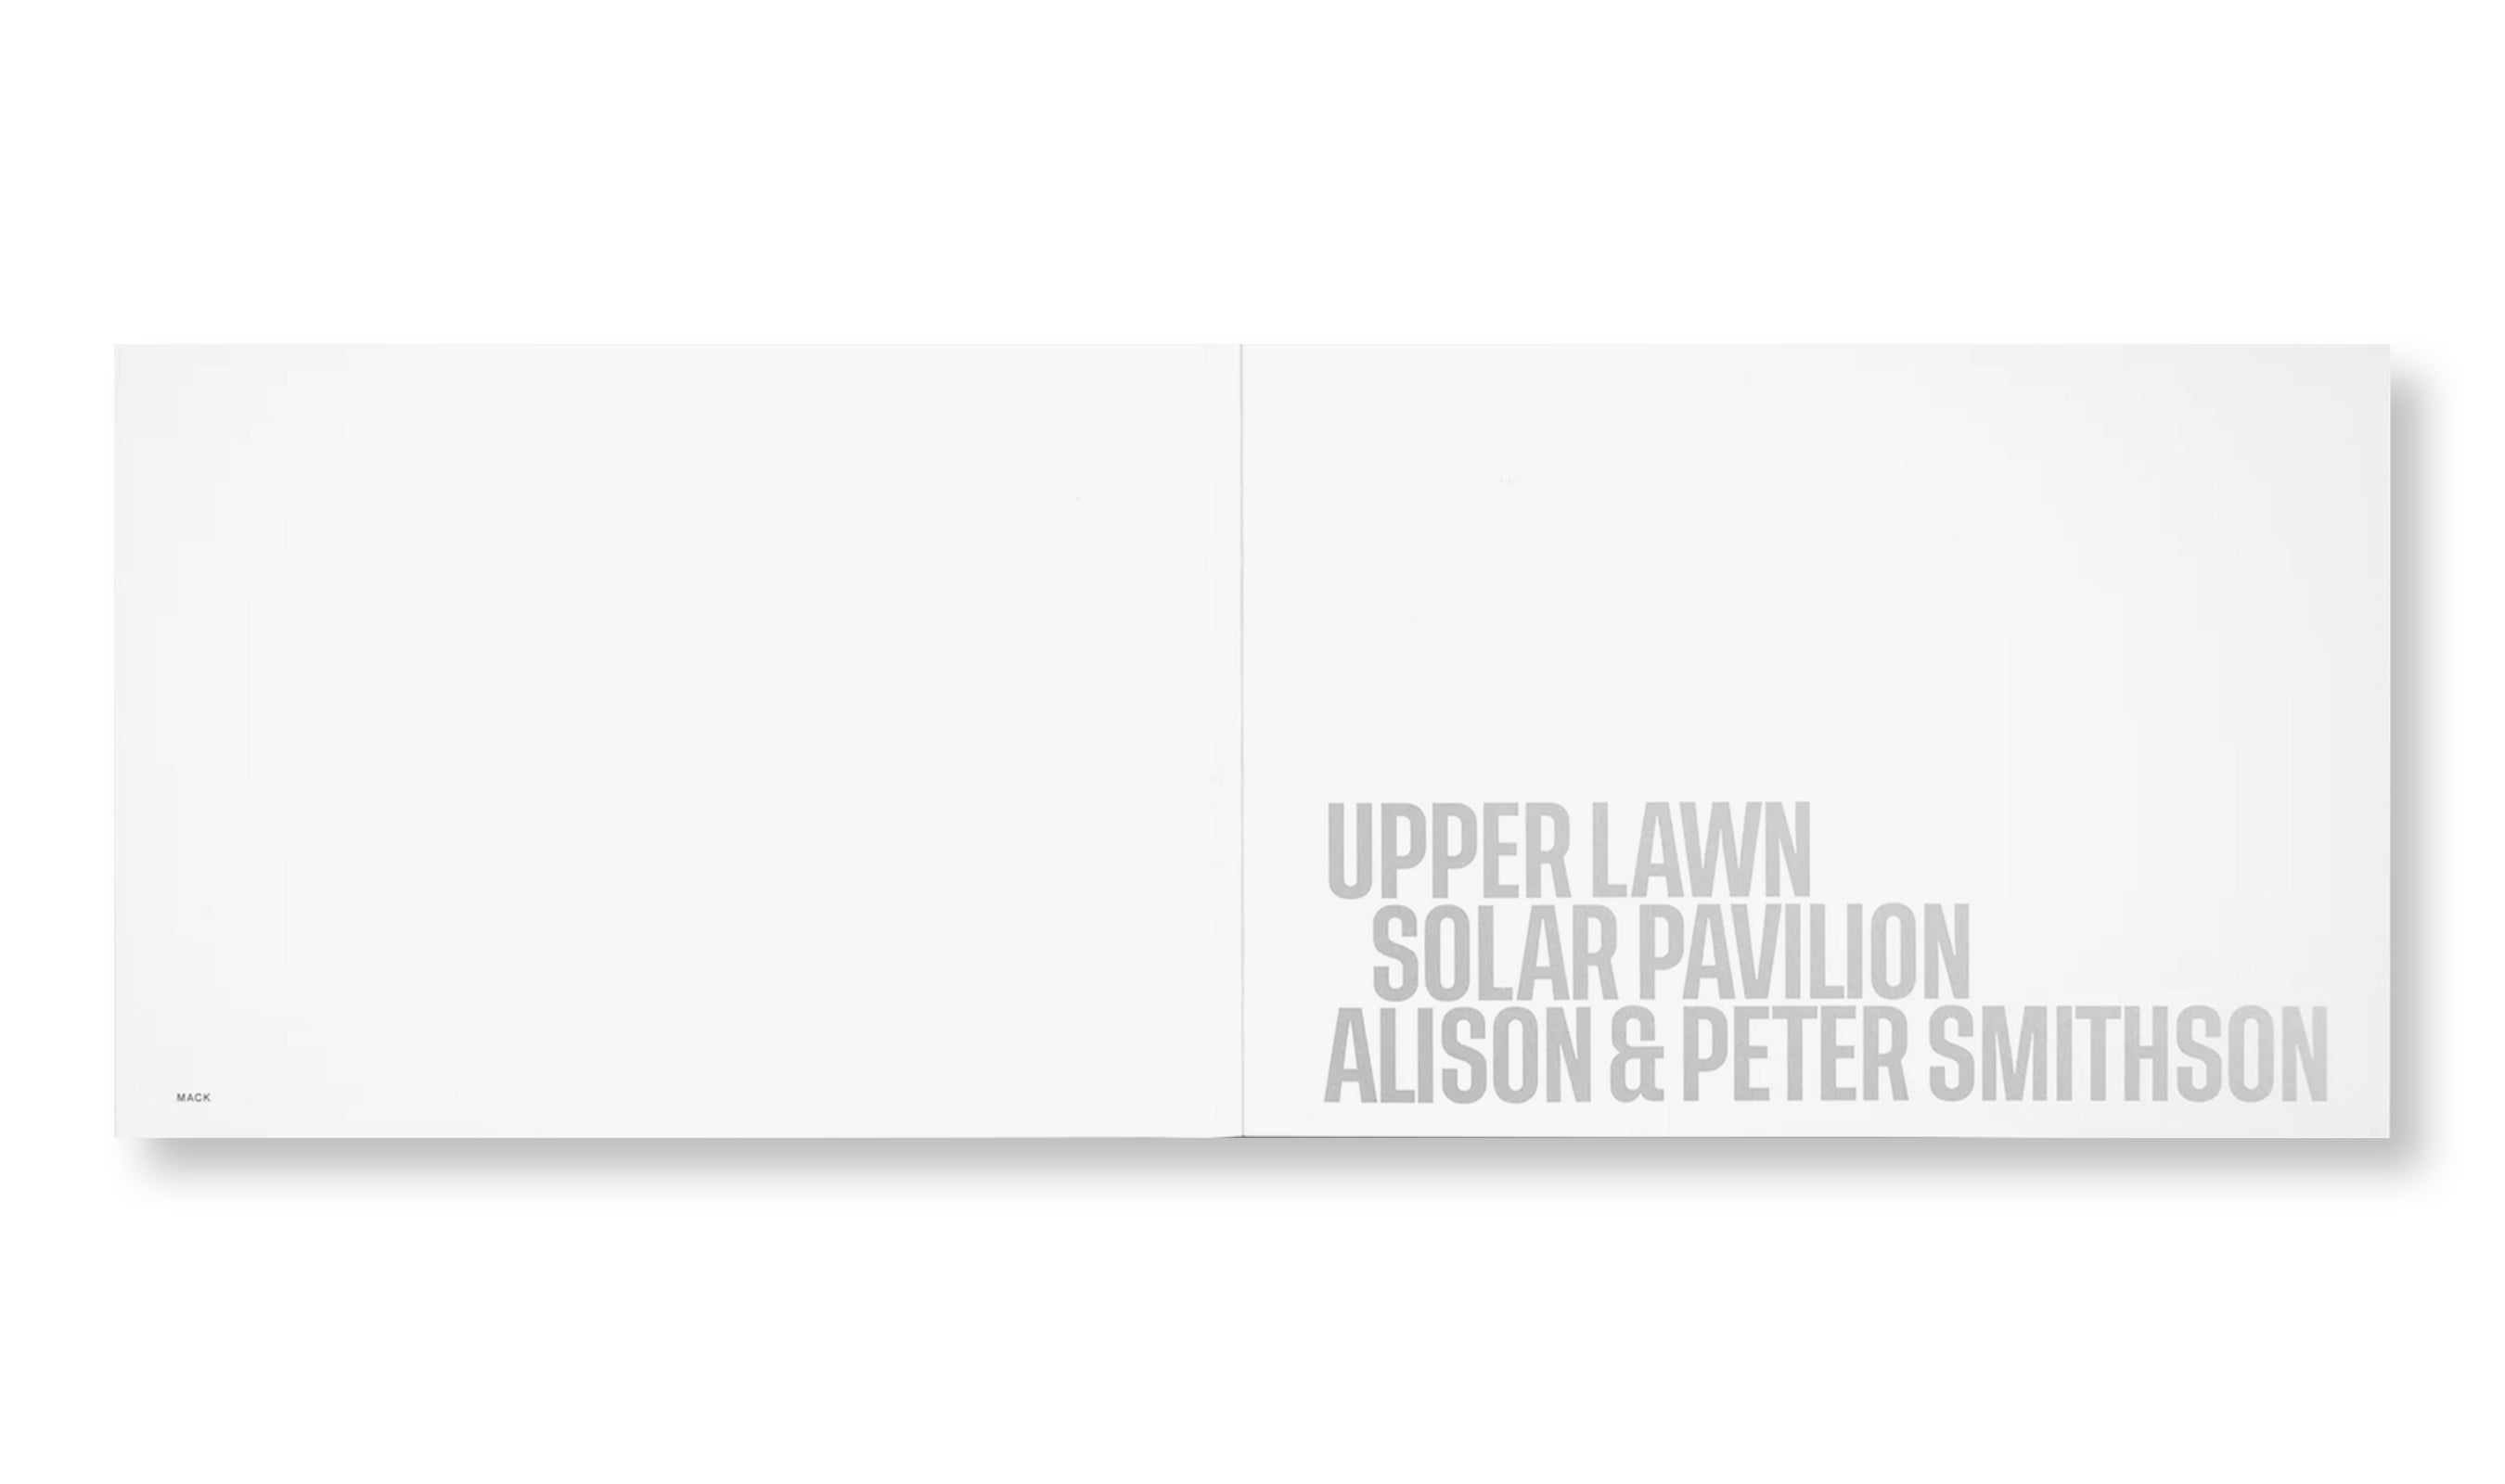 UPPER LAWN, SOLAR PAVILION by Alison & Peter Smithson